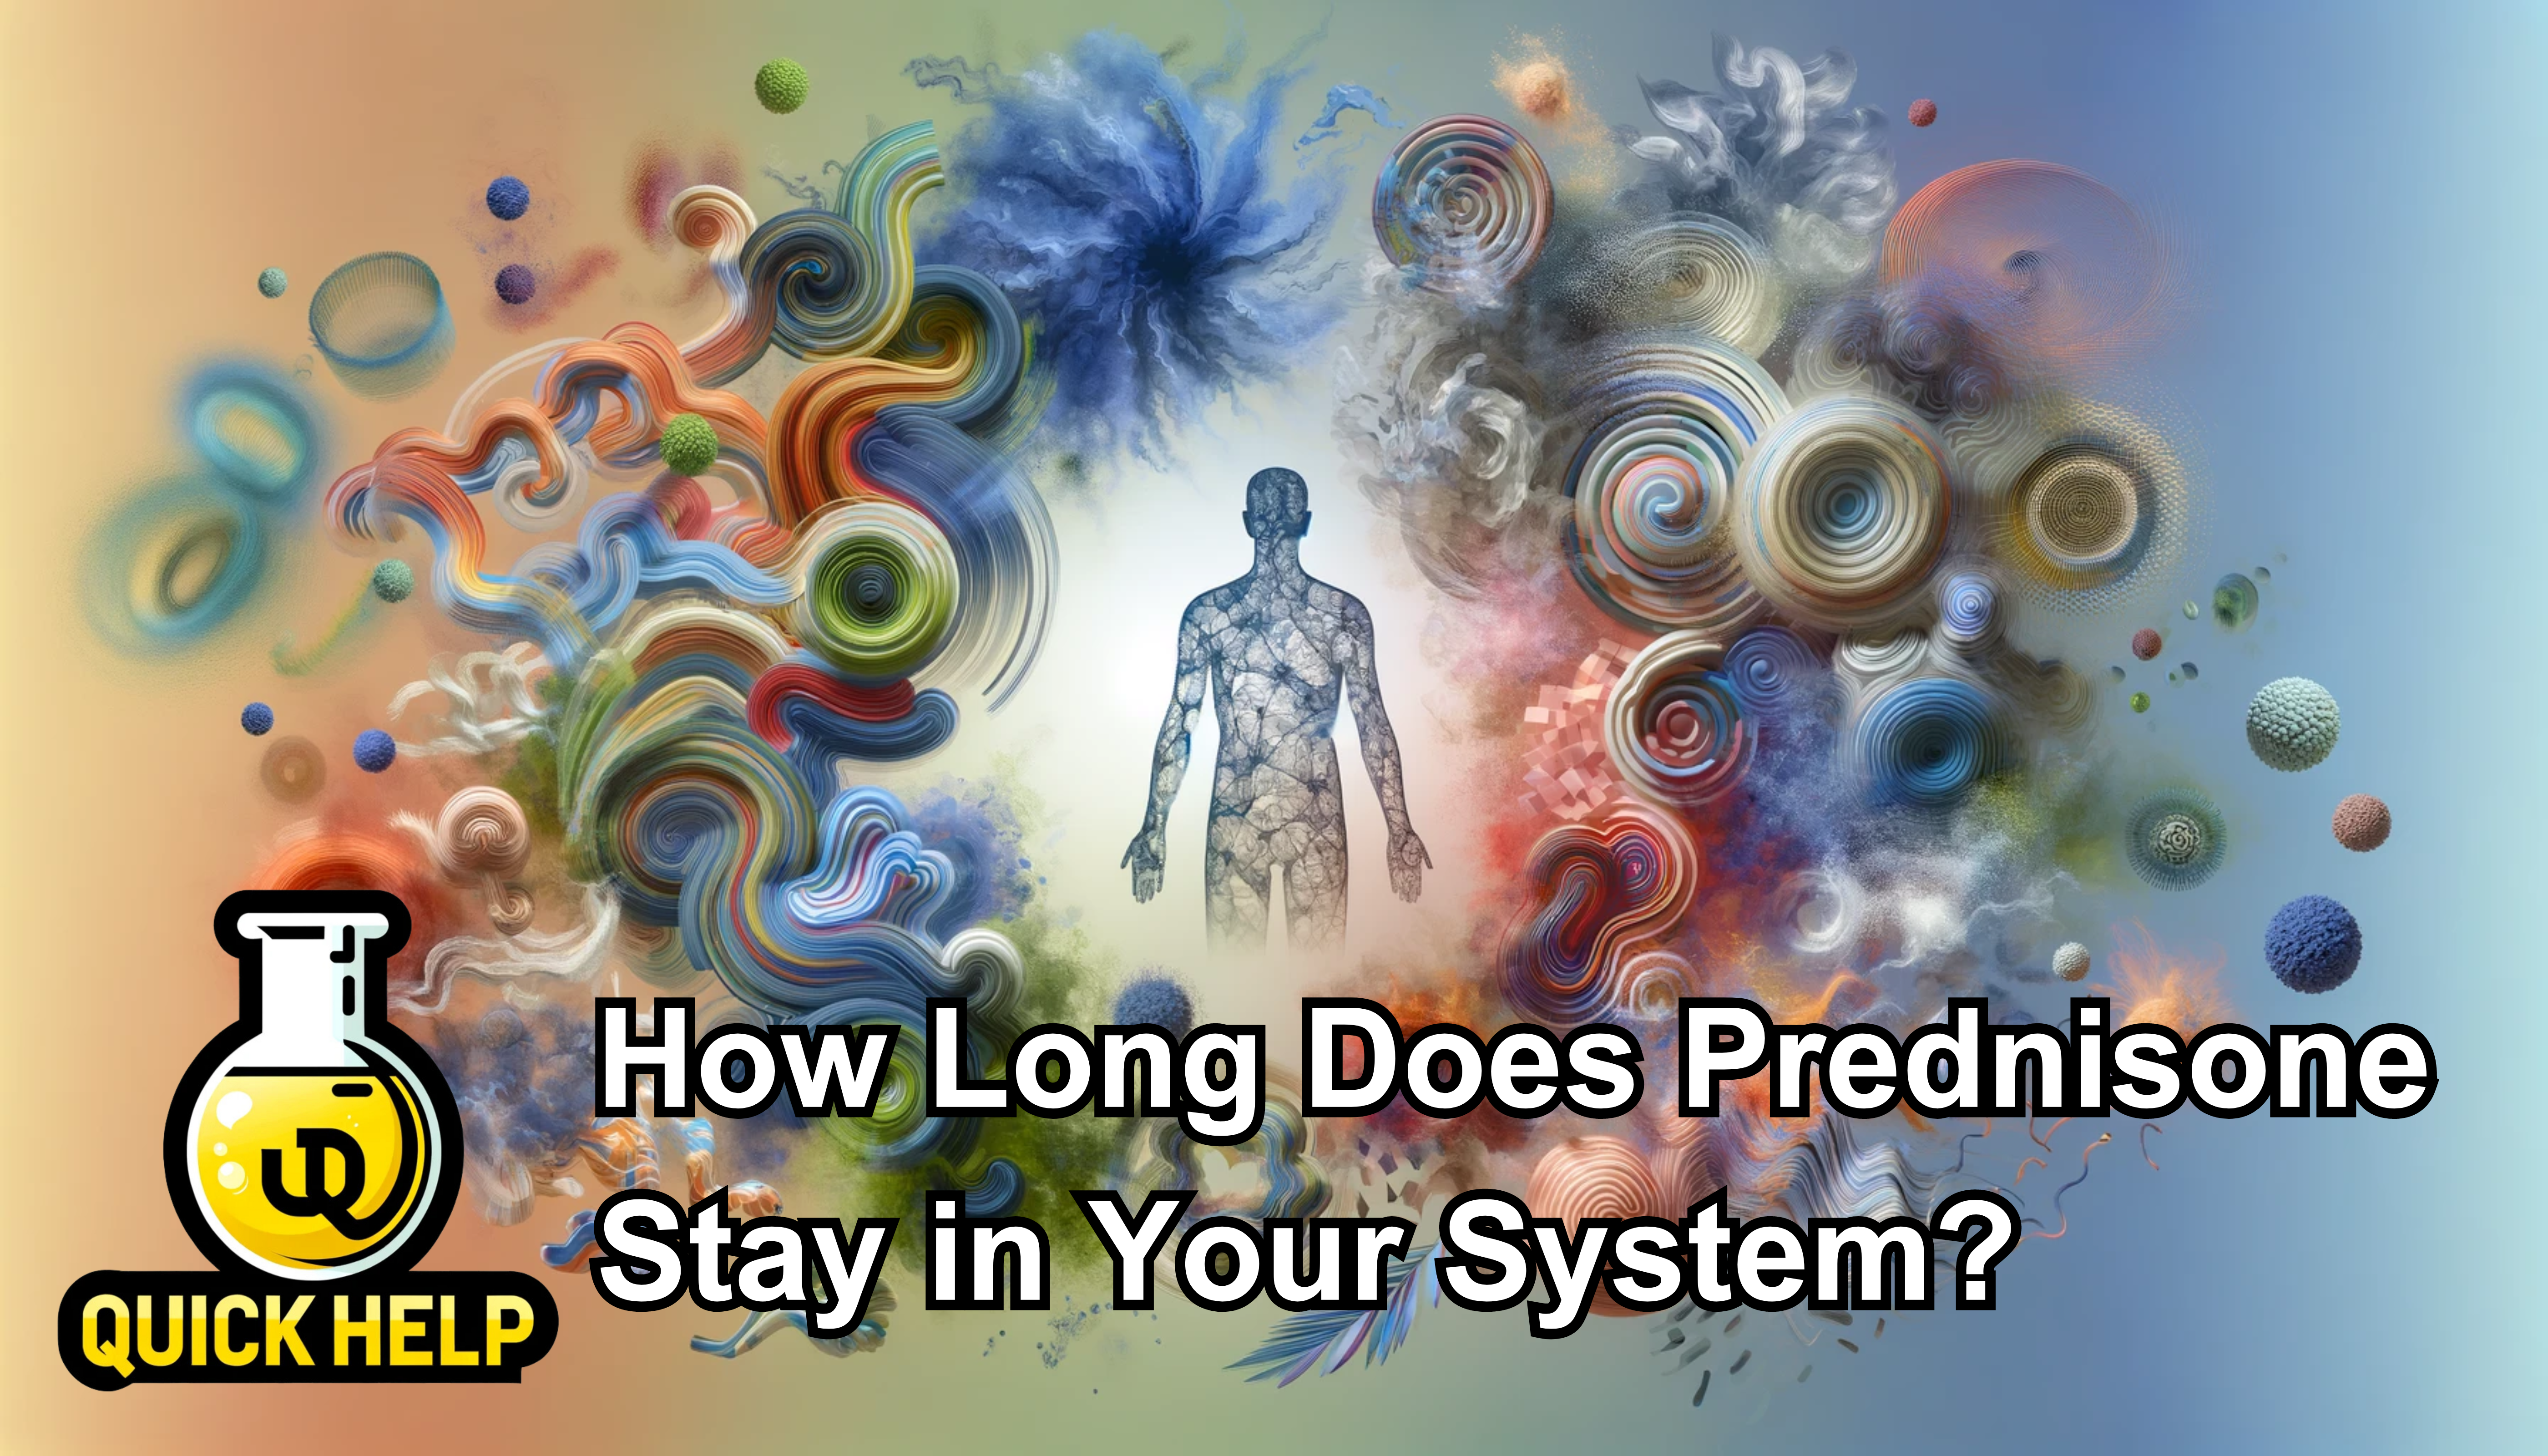 How Long Does Prednisone Stay in Your System? (Urine)